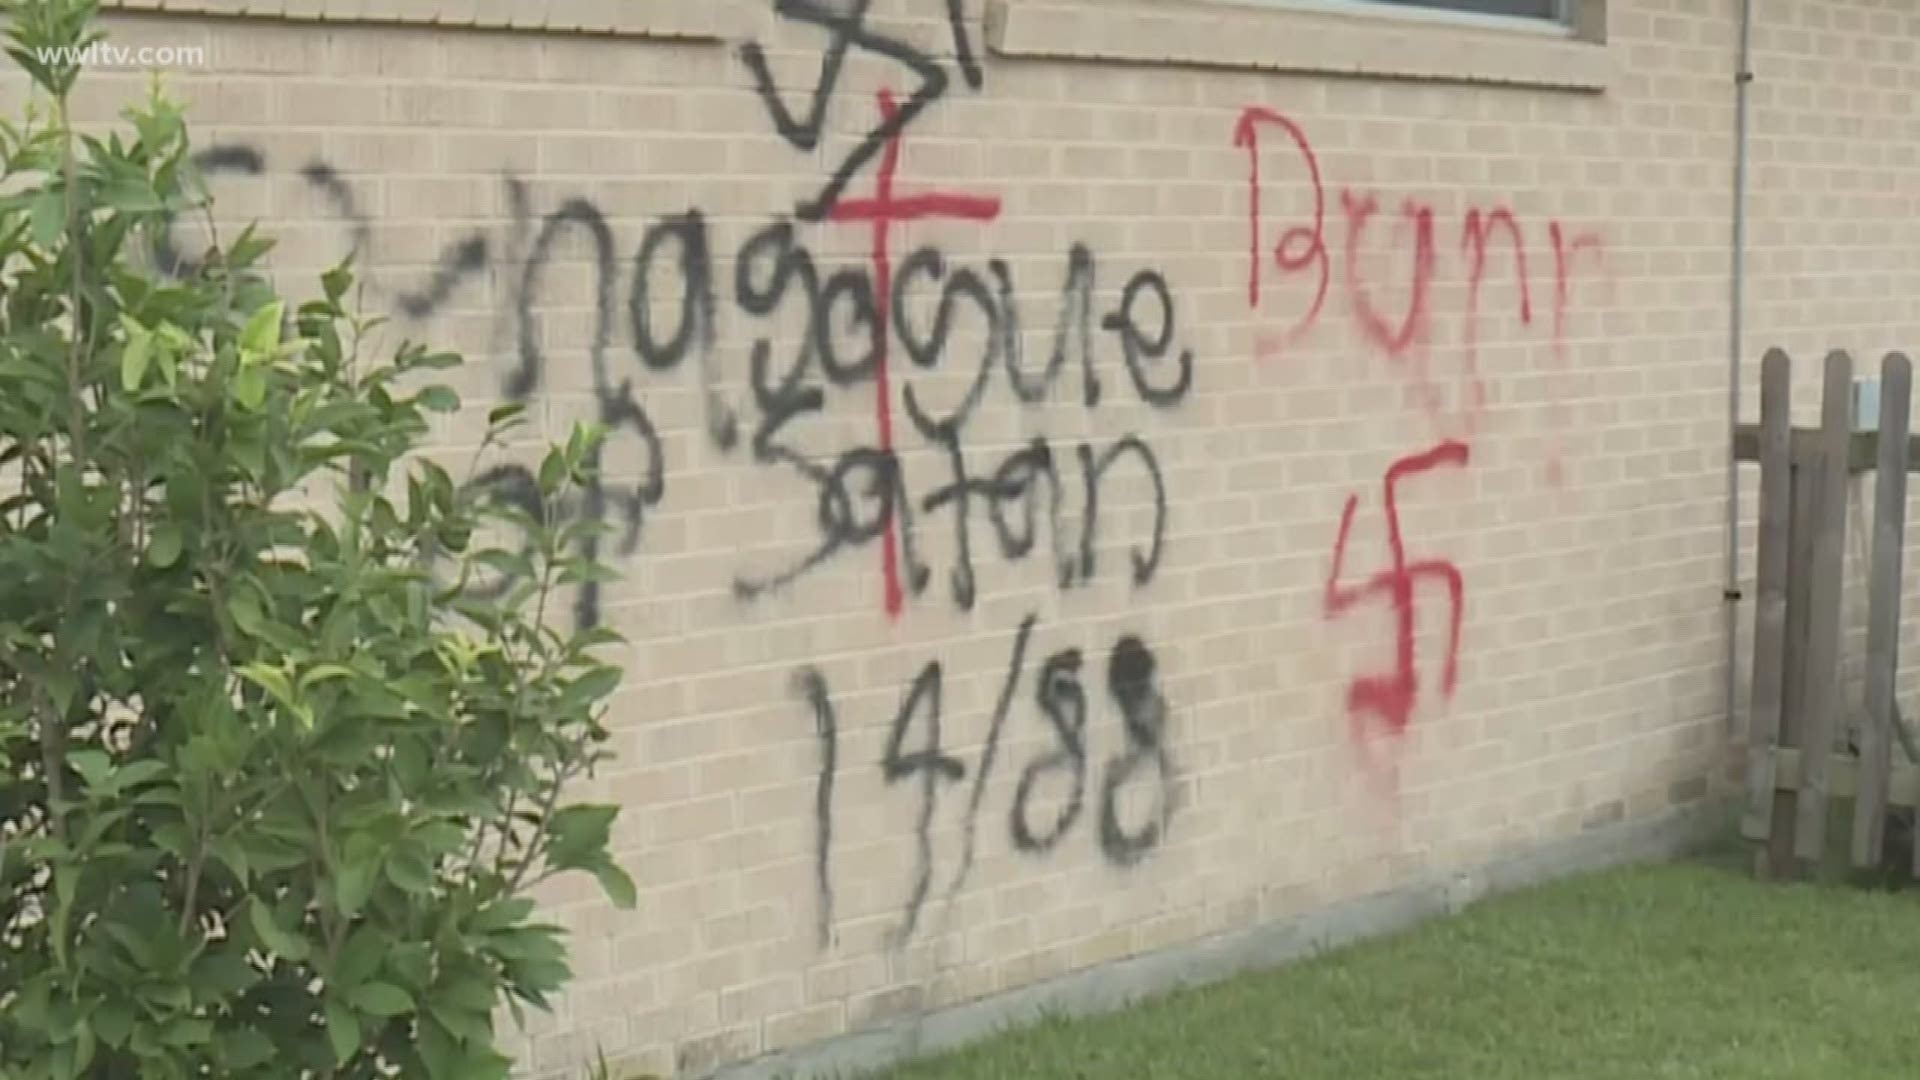 A photo of the graffiti showed swastika symbols in red and black, and the words "synagogue of Satan 14/88" appear as well.